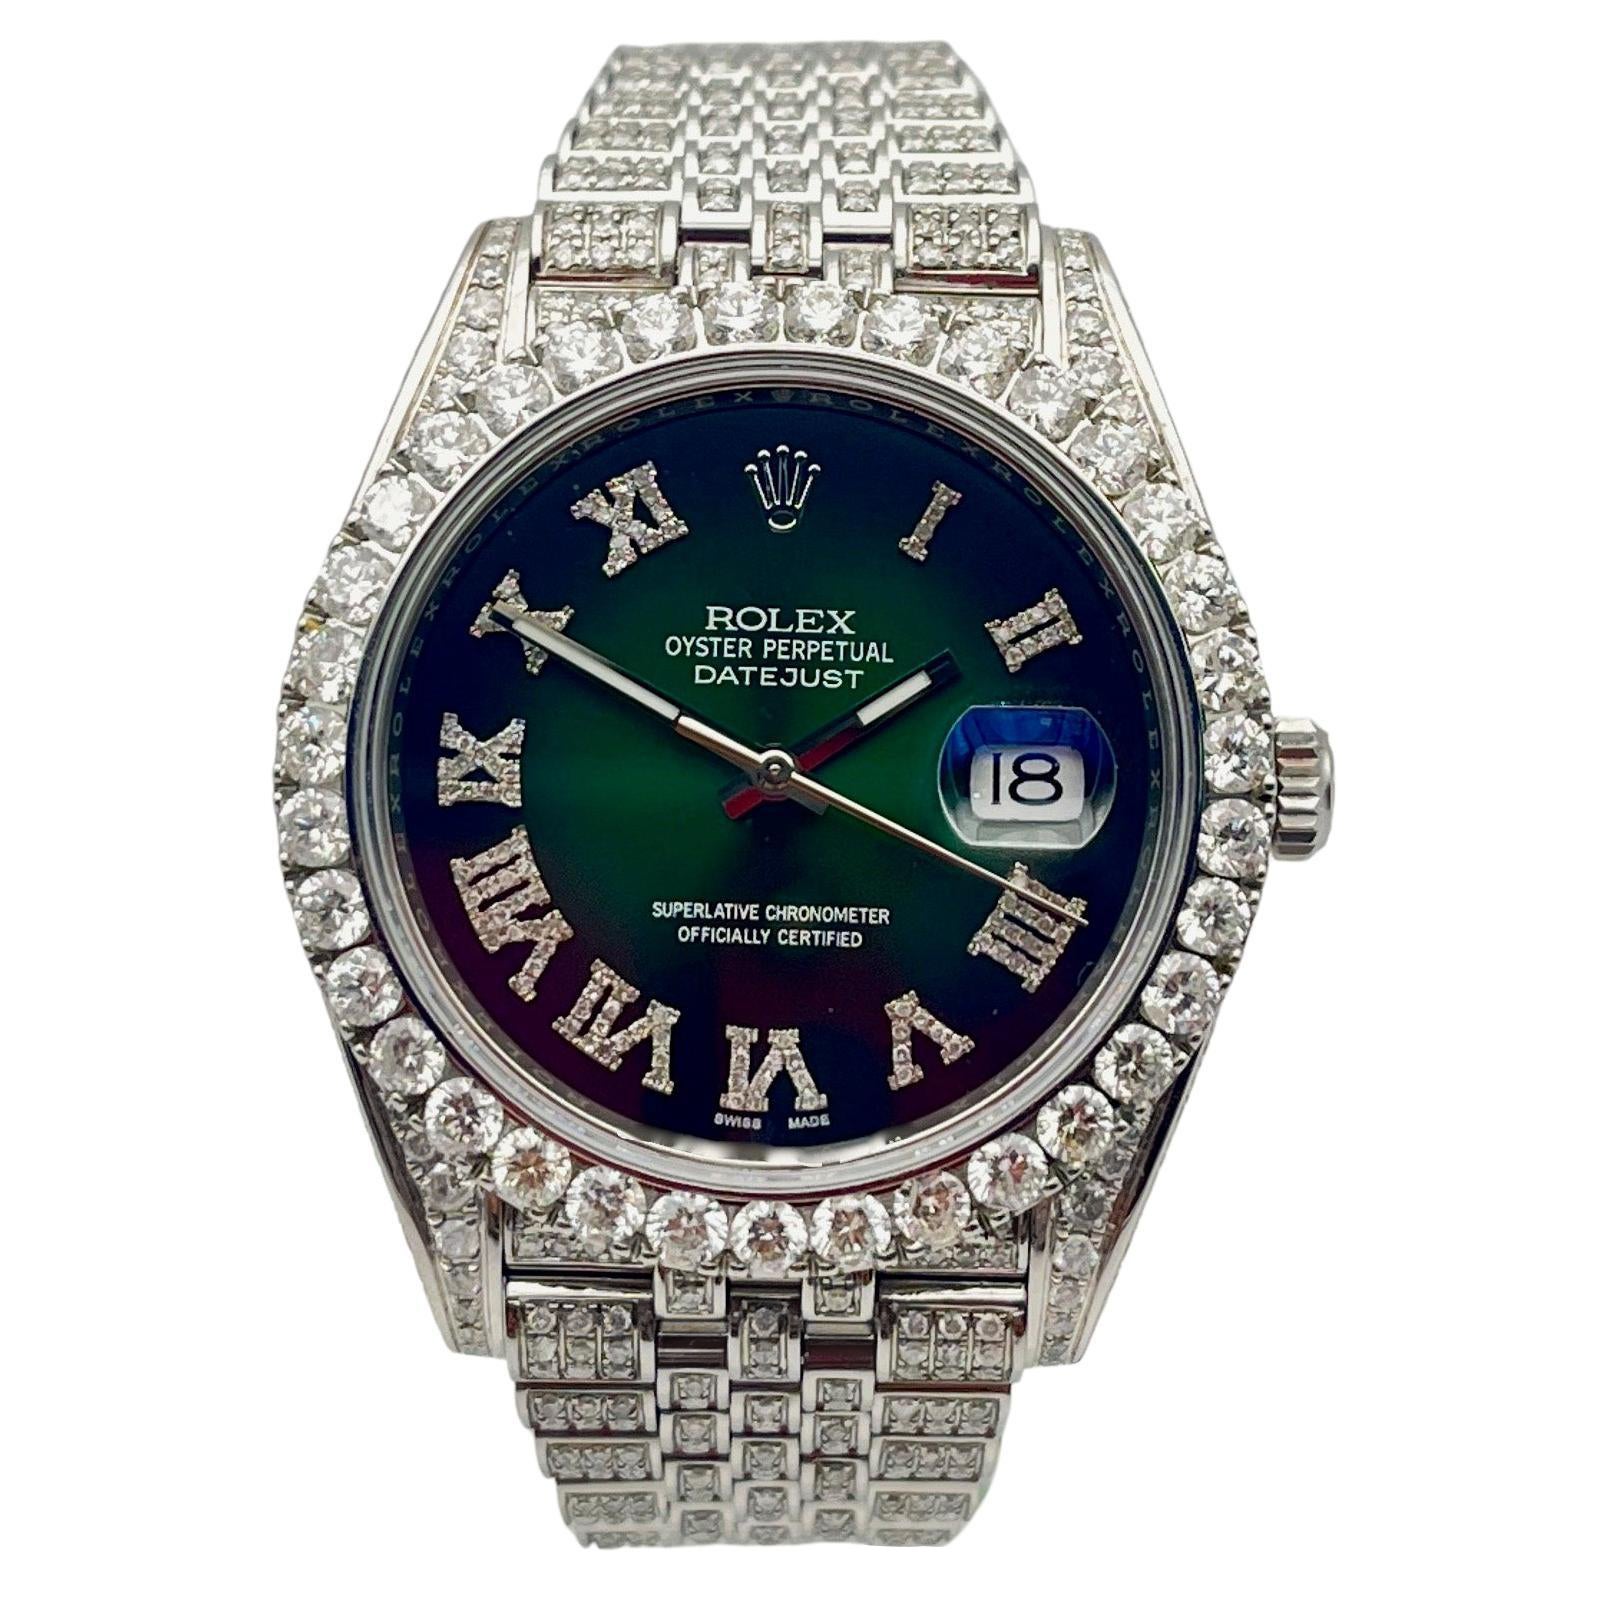 New Rolex Datejust Full Diamond green aftermarket 41mm with box and papers 2020